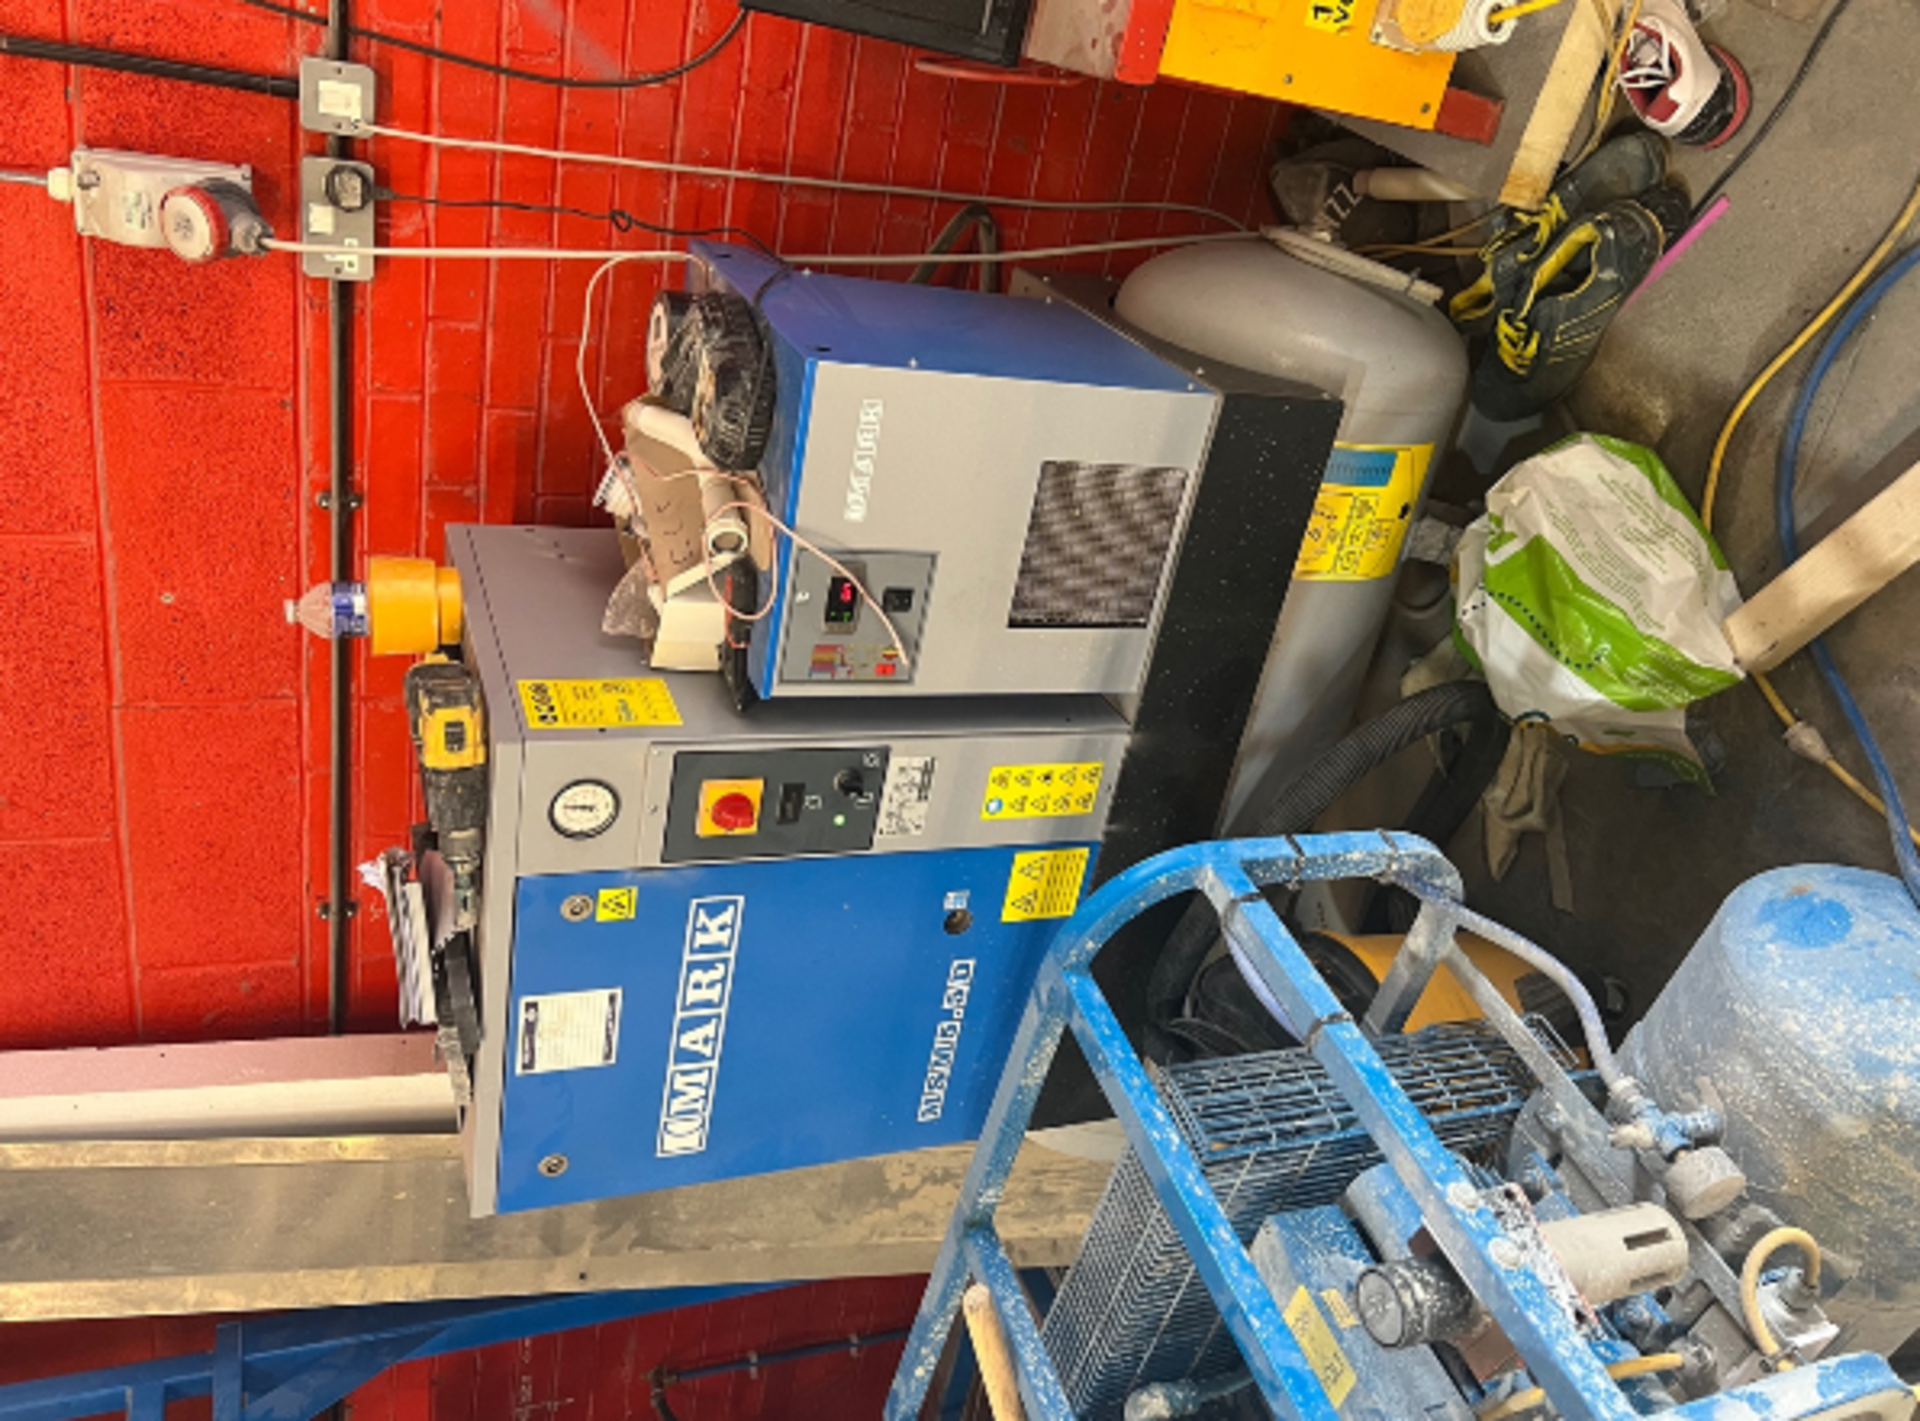 2019 Waterjet Sweden NCT30 waterjet cutting machine, comes with MARK compressor M5M.5D and KMT pump - Image 10 of 11